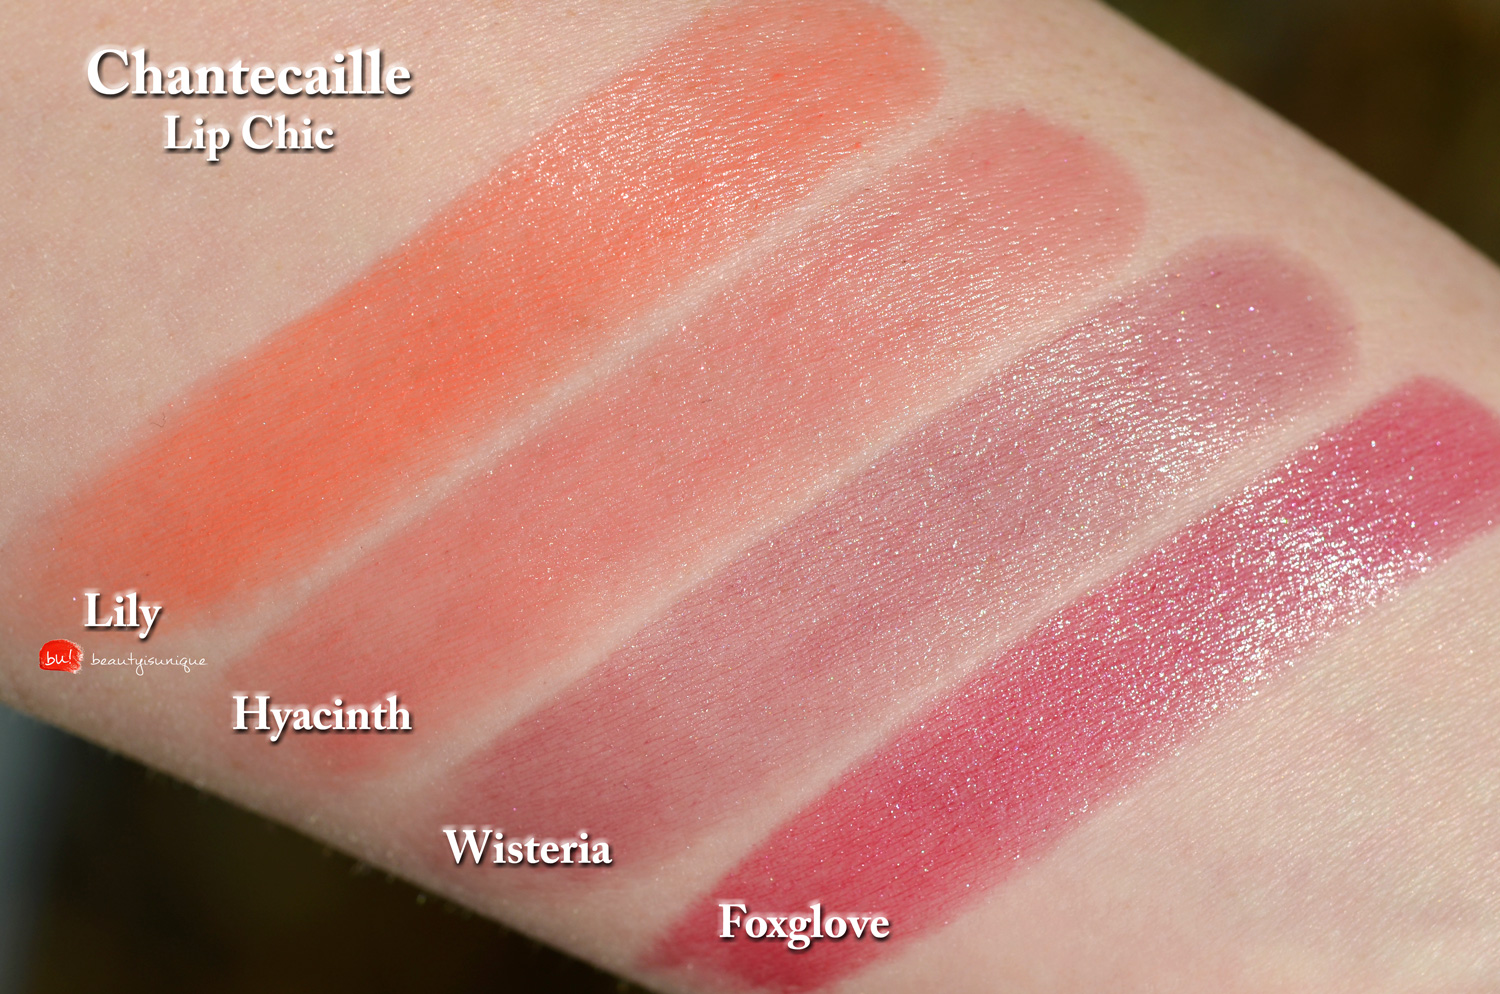 chantecaille-hyacinth-wisteria-foxglove-swatches